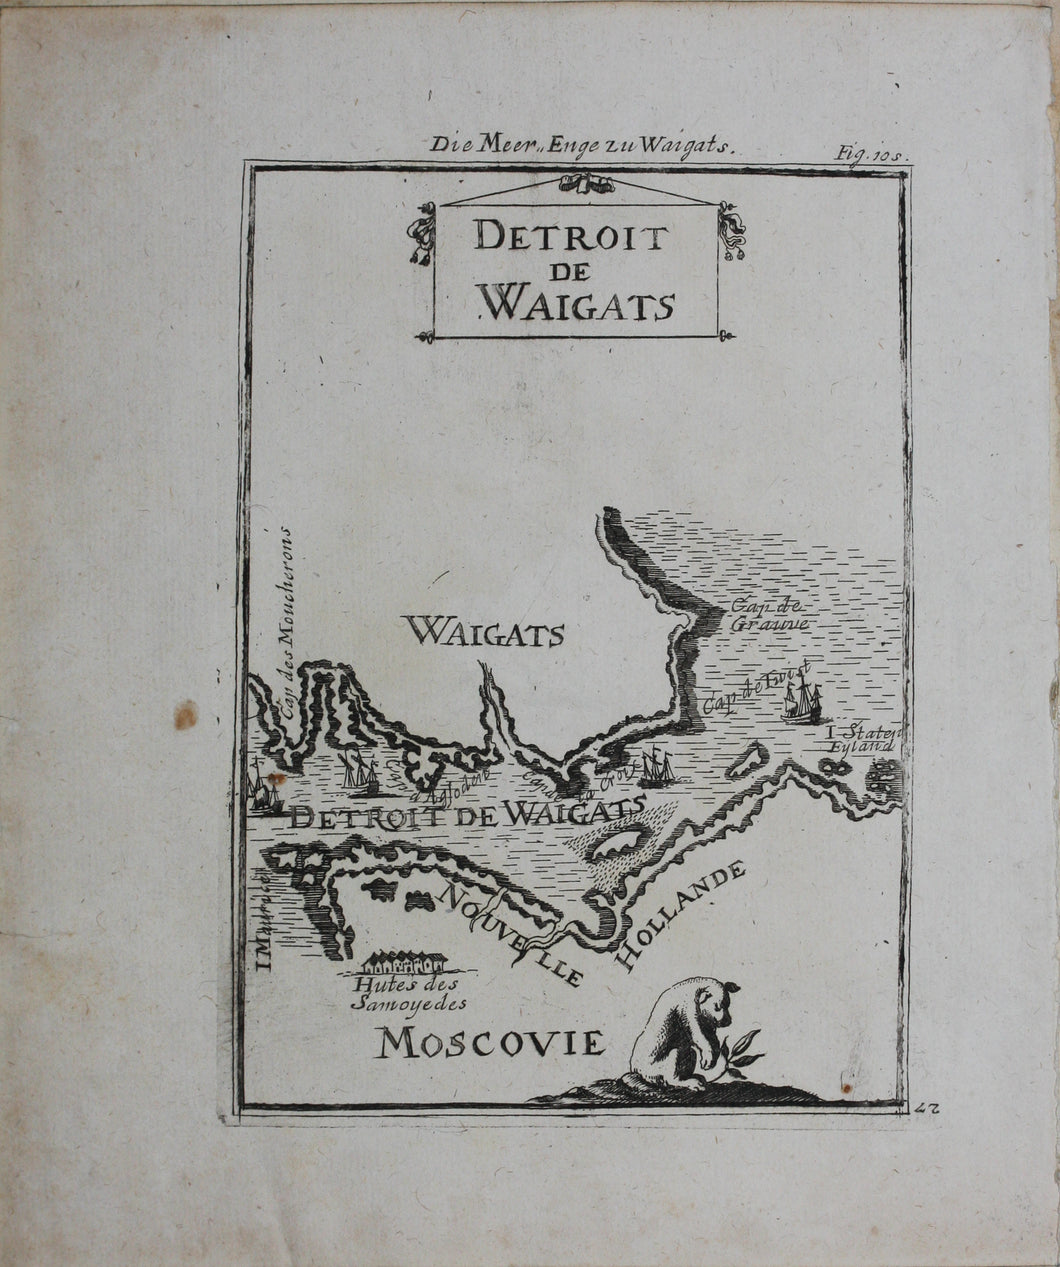 Alain Manesson Mallet. Map of the Strait of Waigats. Engraving. 1719.